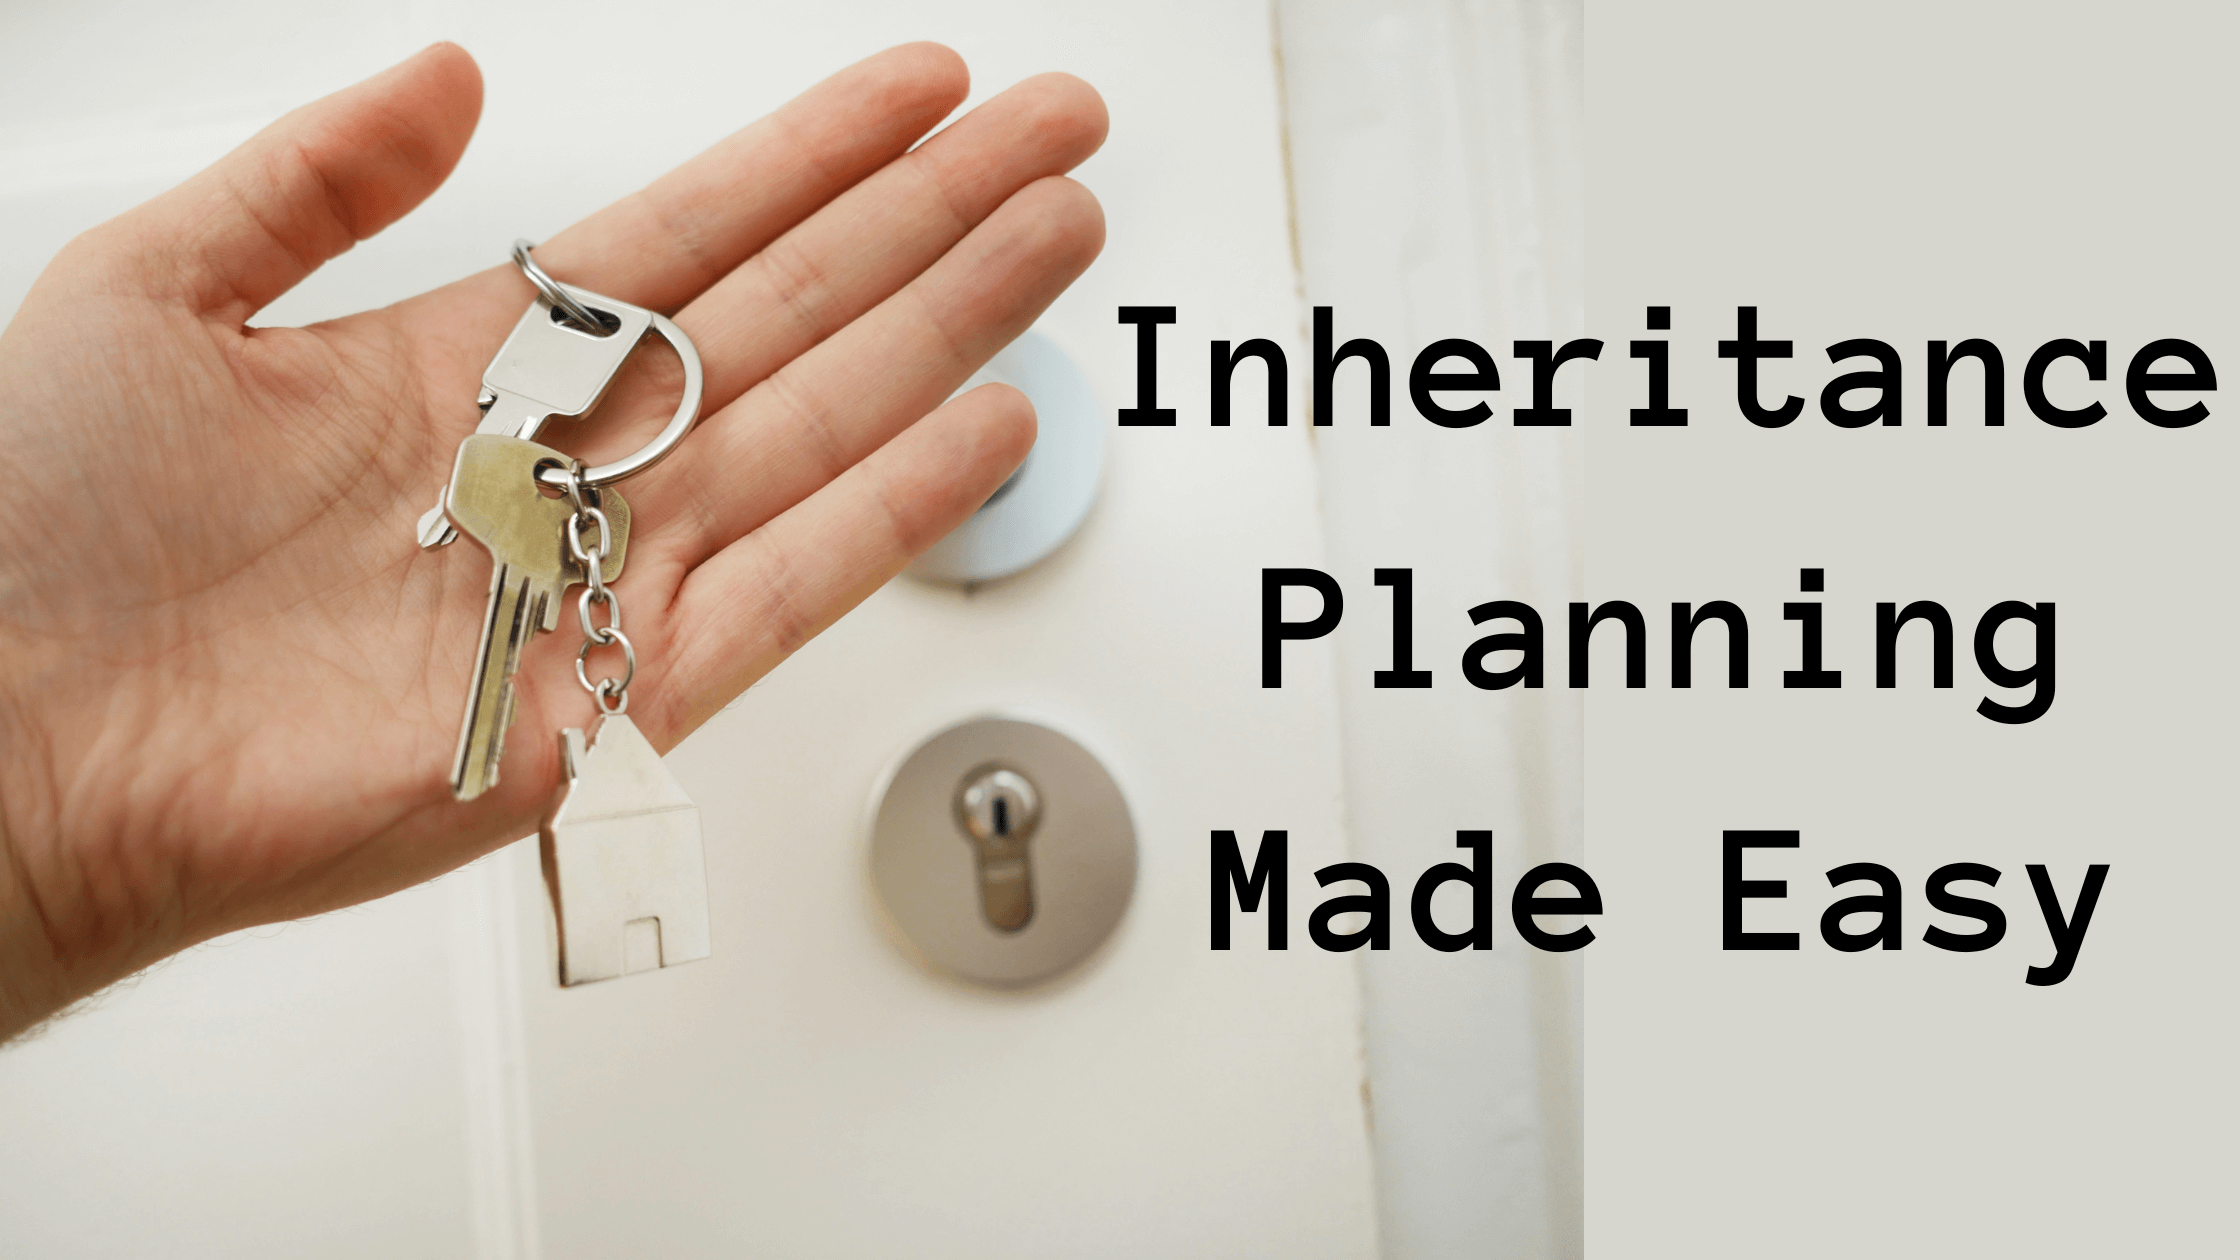 transferring ownership of property from parent to child before death